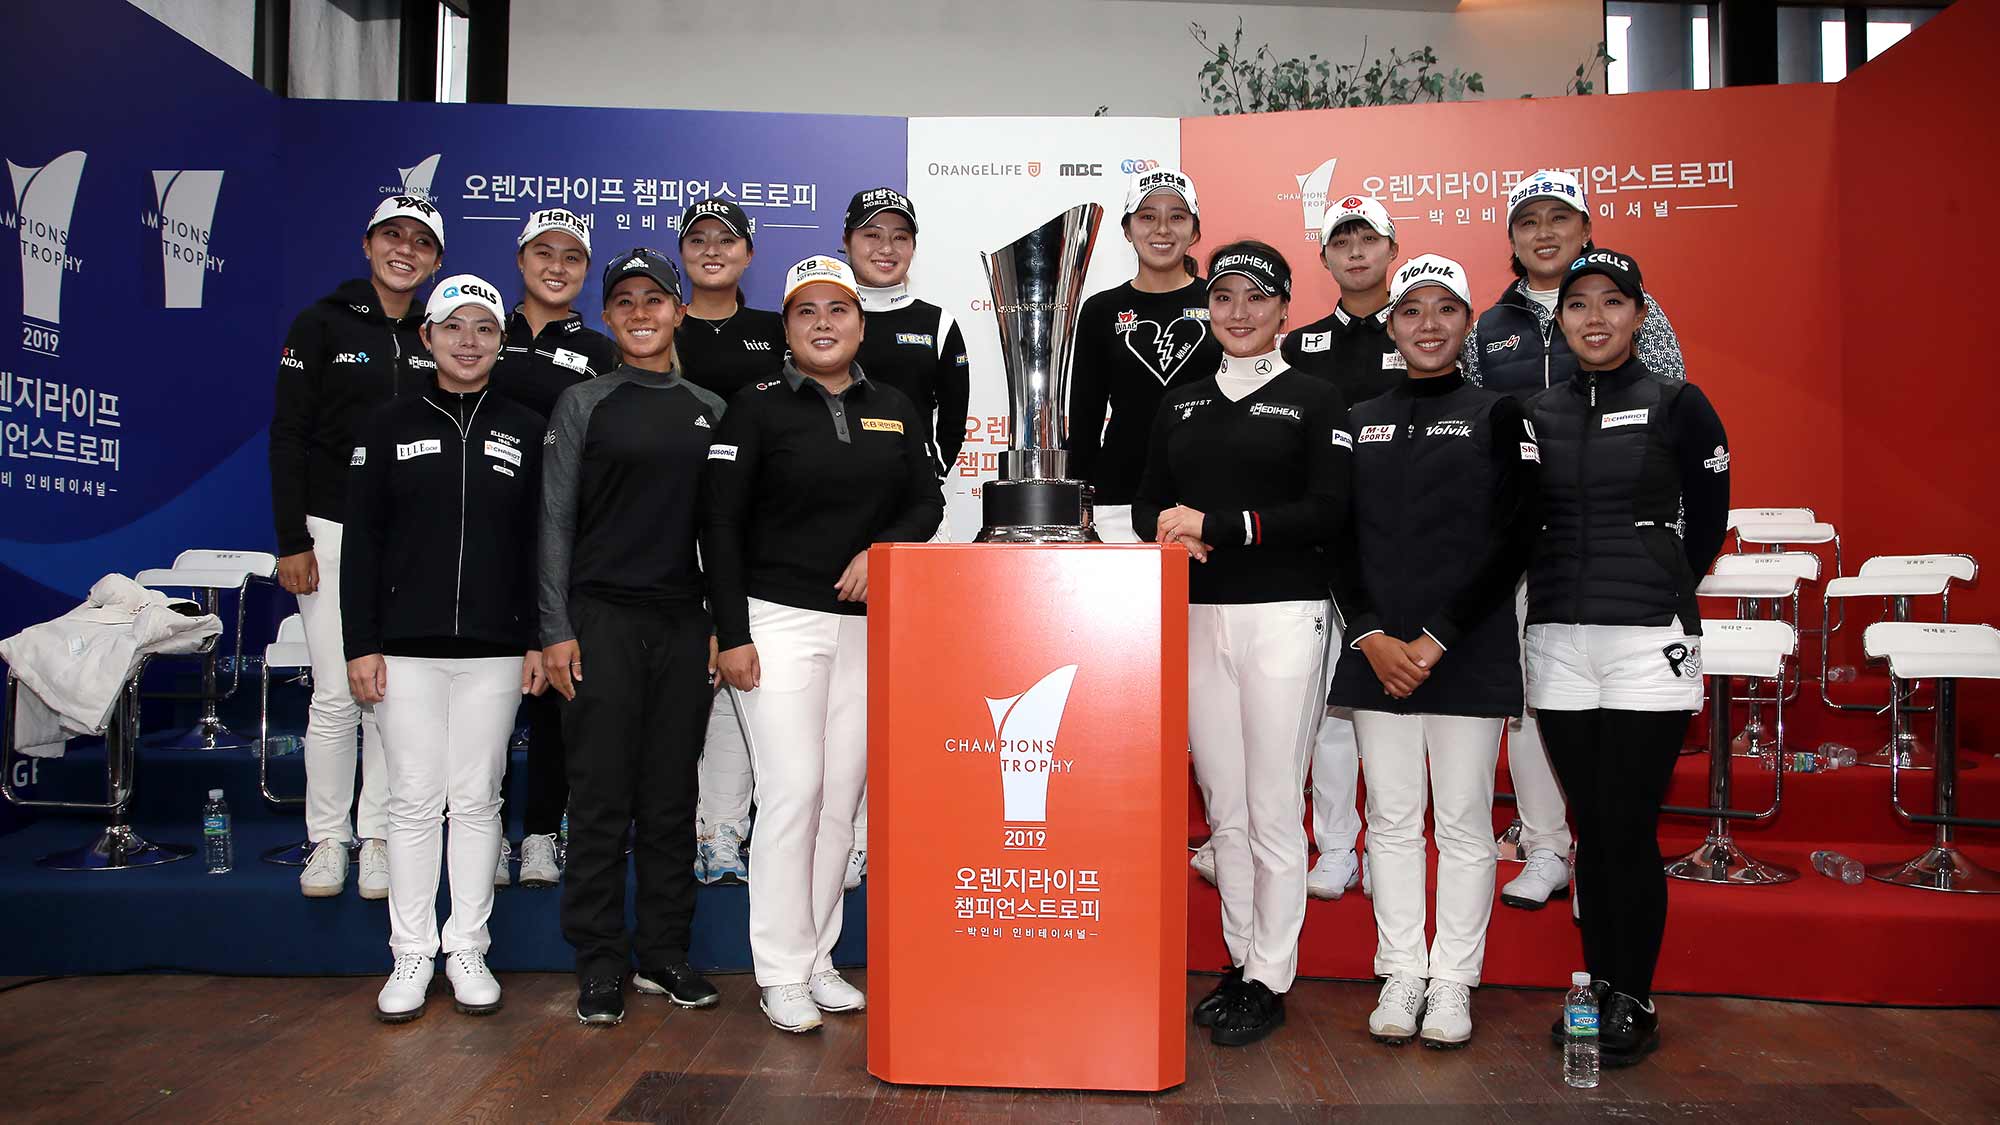 The LPGA Team poses during the 2019 Orange Life Champions Trophy Inbee Park Invitational at Blue One The Honors Country Club in Gyeongju, Republic of Korea